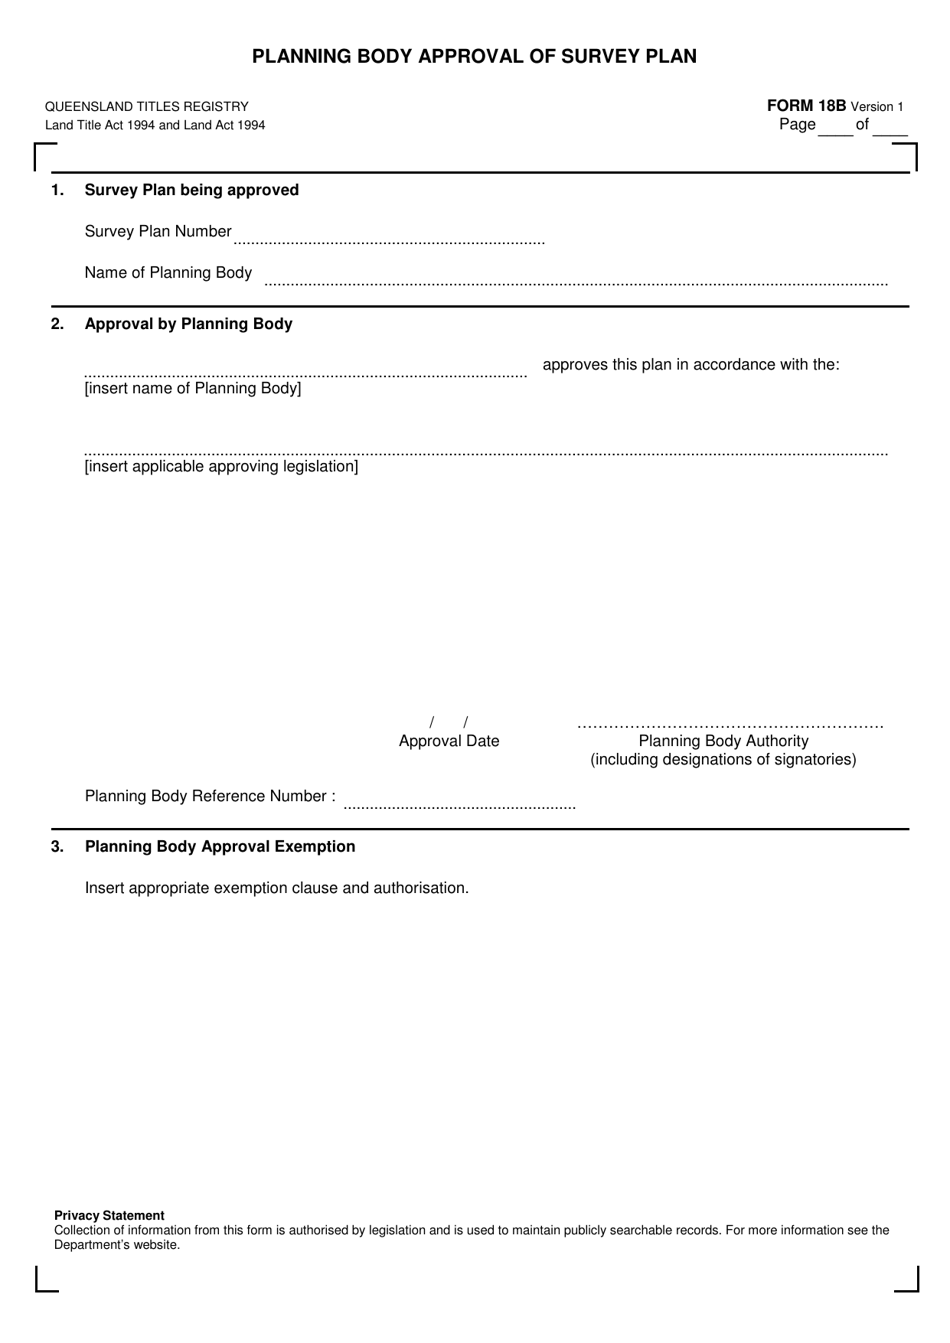 Form 18B Planning Body Approval of Survey Plan - Queensland, Australia, Page 1